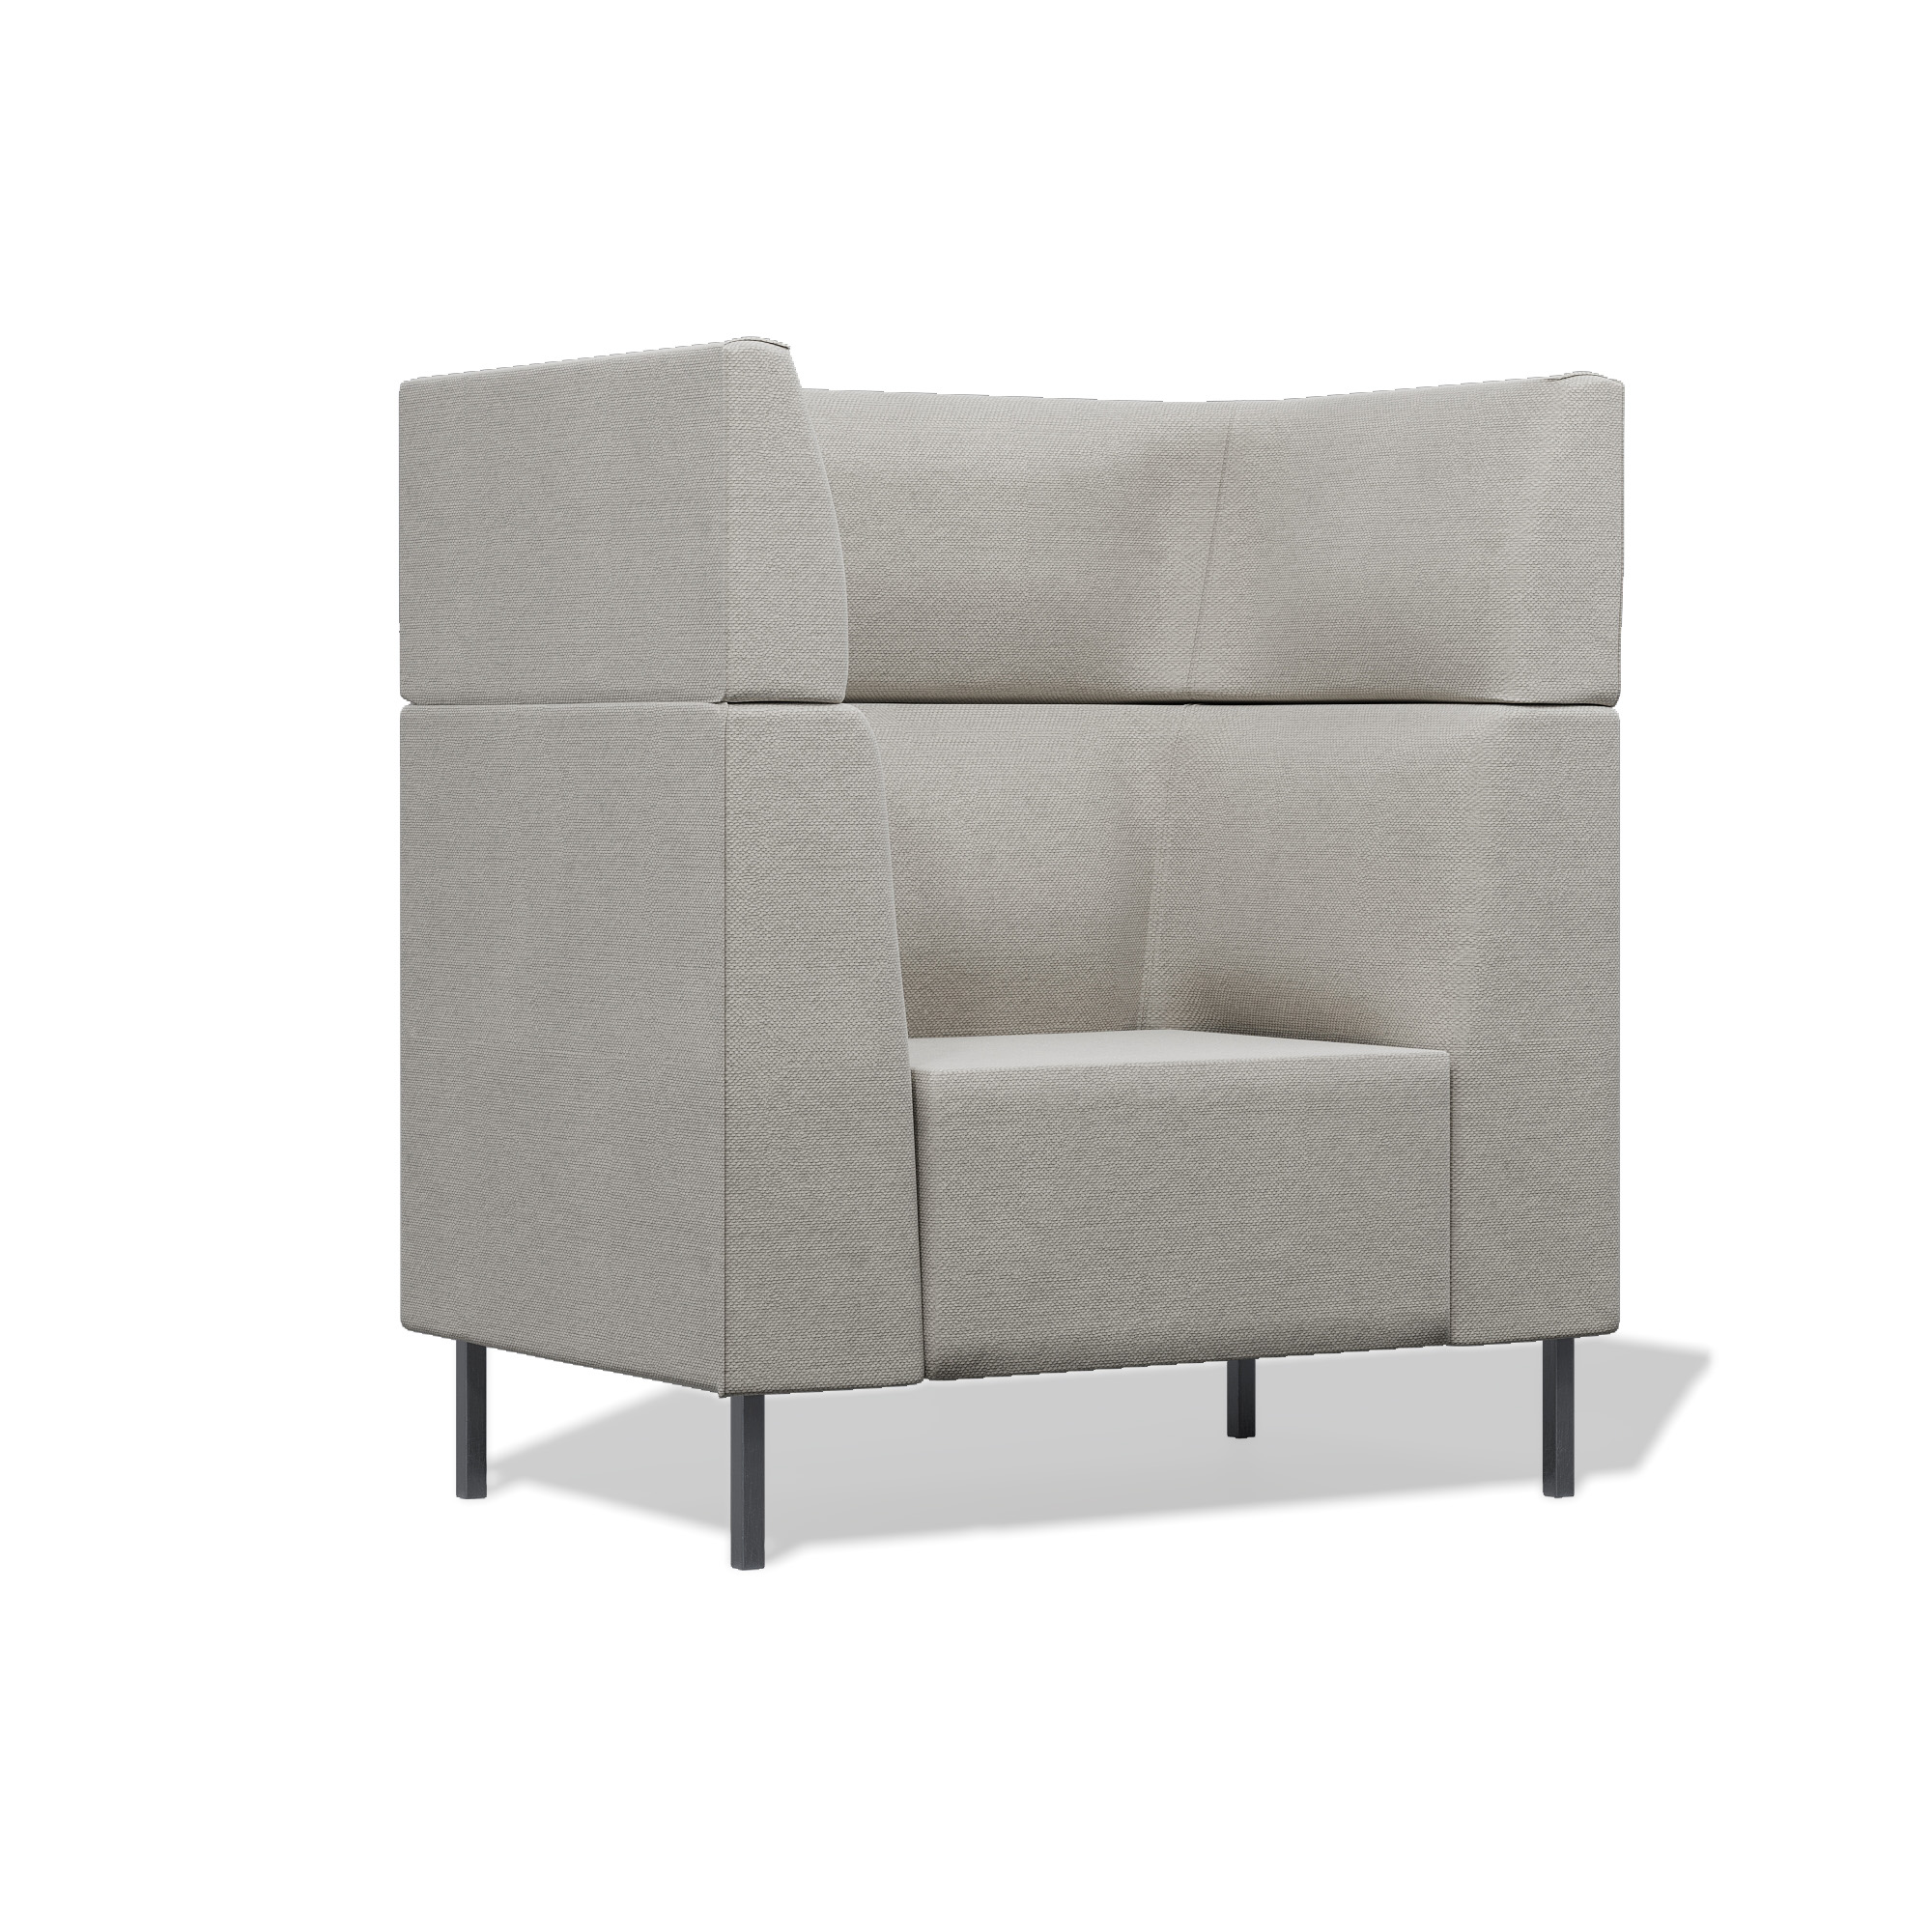 commercial lounge chair with two panels and metal legs